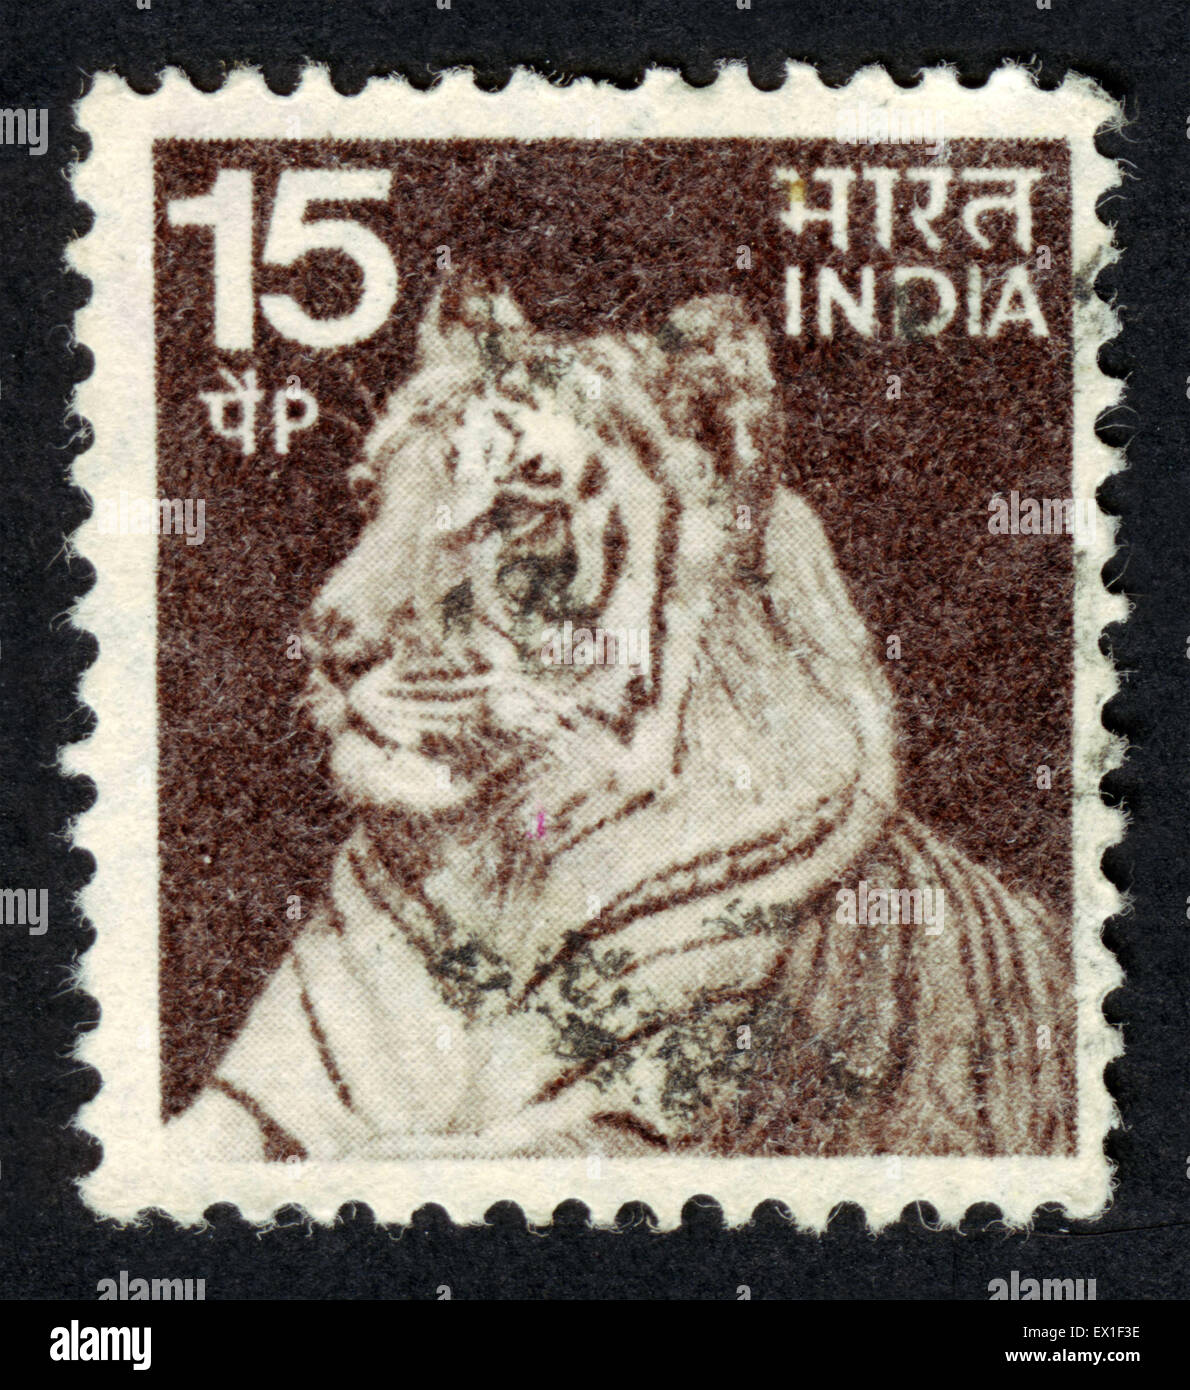 Tiger Stamps Are Here to Stay!*